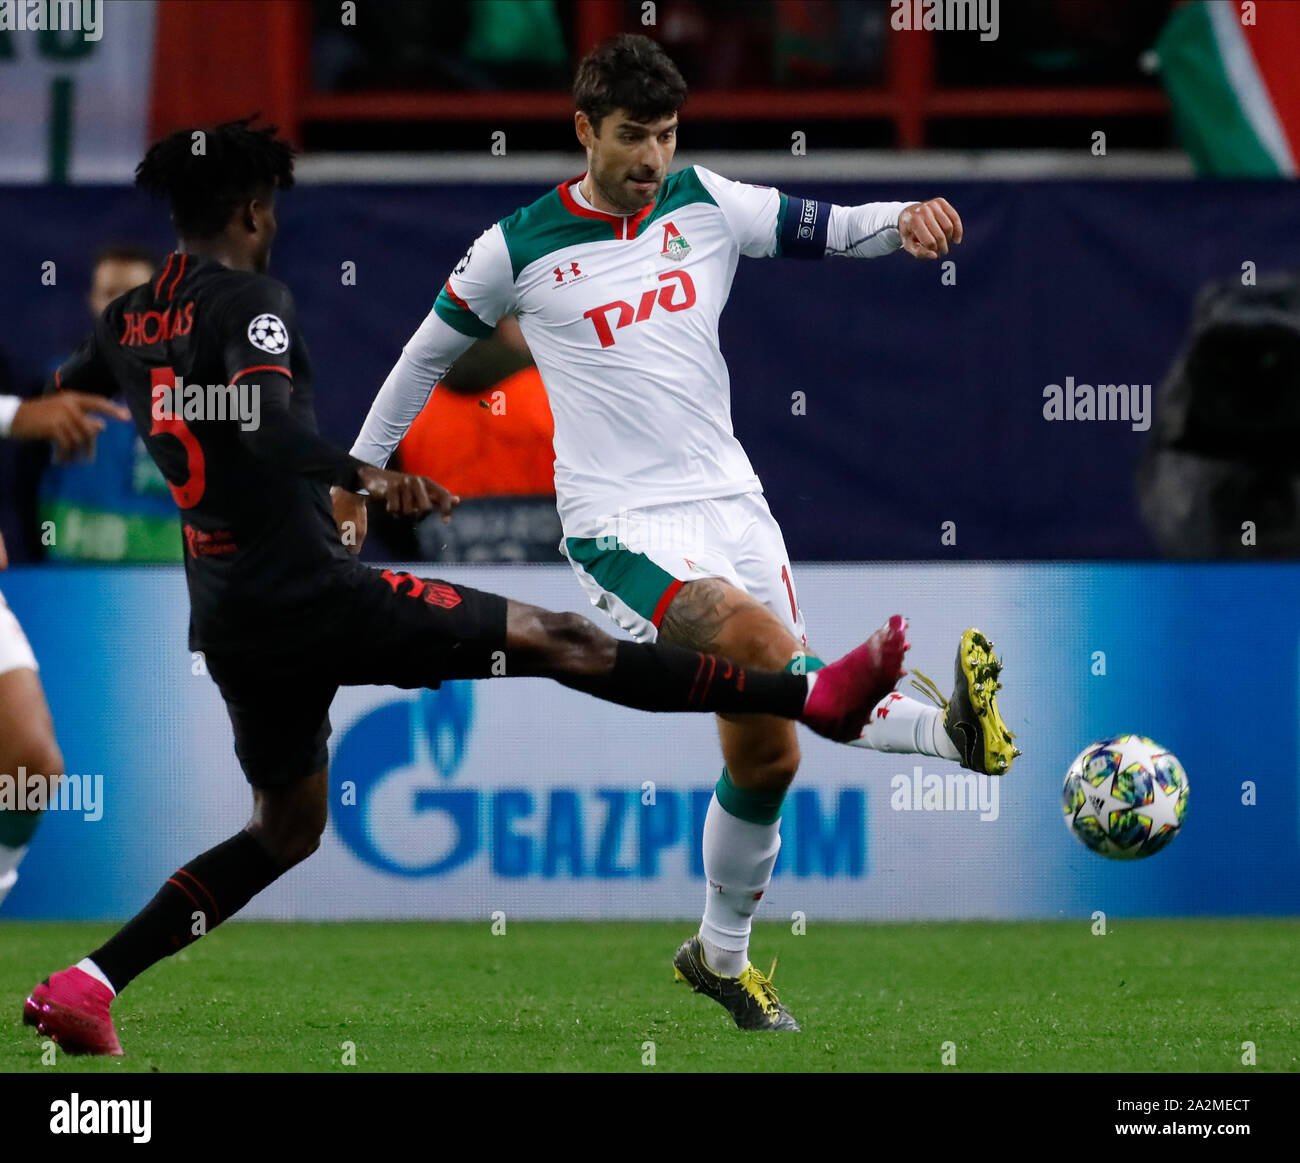 MOSCOW, RUSSIA - OCTOBER 01: Vedran Corluka (R) of Lokomotiv Moskva and Thomas Partey of Atletico Madrid vie for the ball during the UEFA Champions League group D match between Lokomotiv Moskva and Atletico Madrid at RZD Arena on October 1, 2019 in Moscow, Russia. (Photo by MB Media) Stock Photo